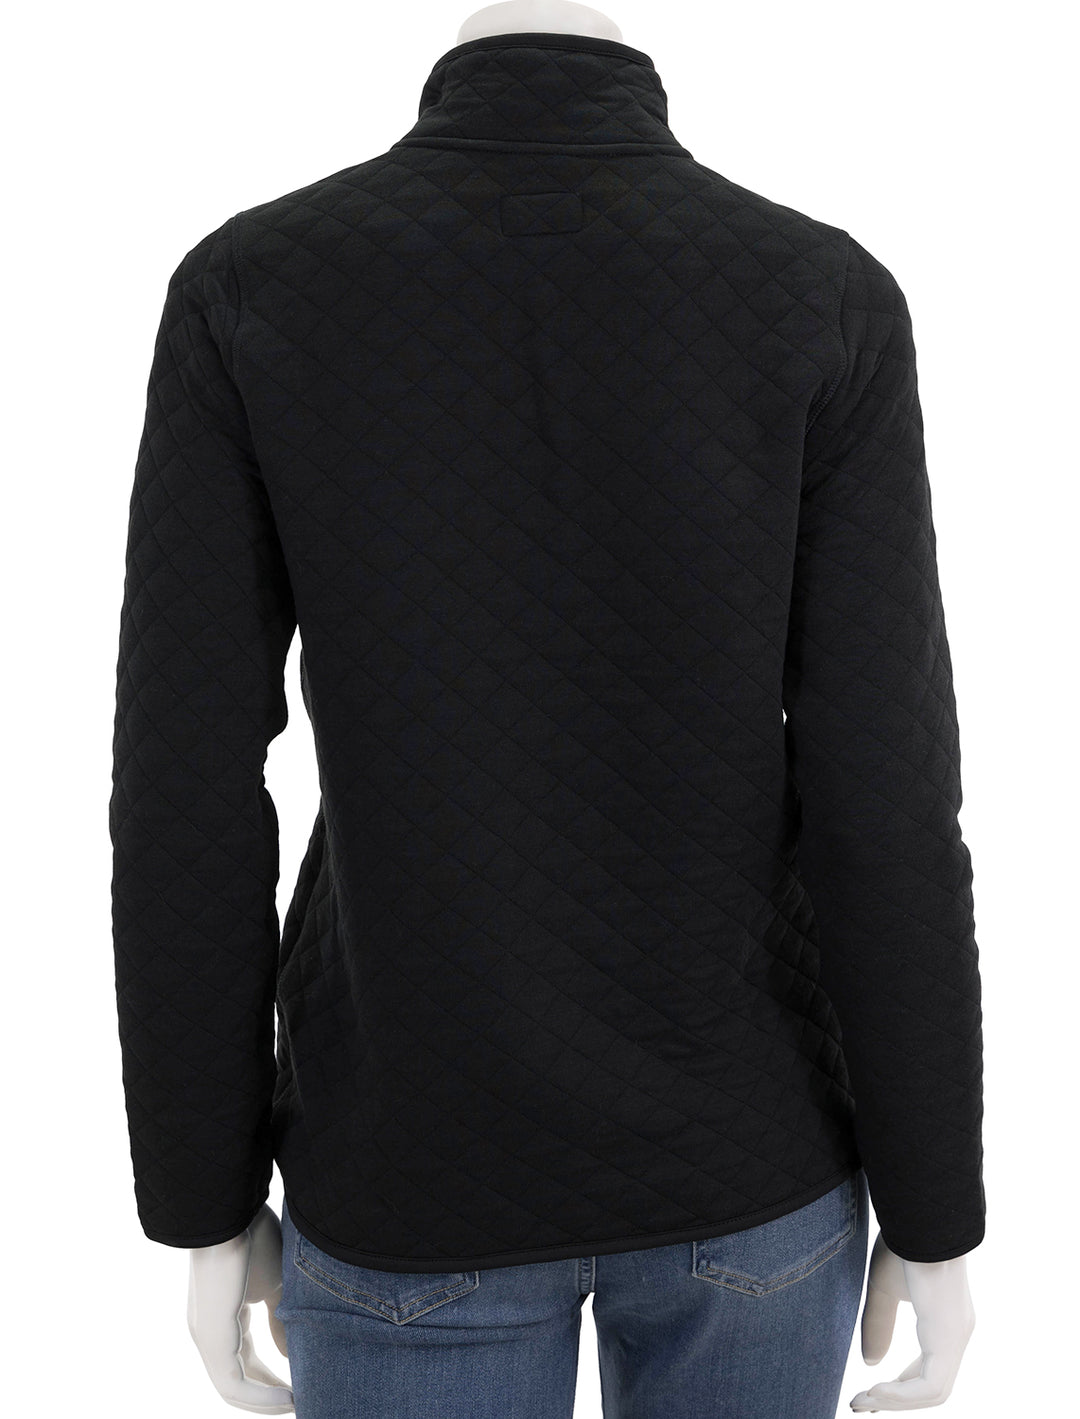 Back view of Marine Layer's corbet quilted pullover in black heather.